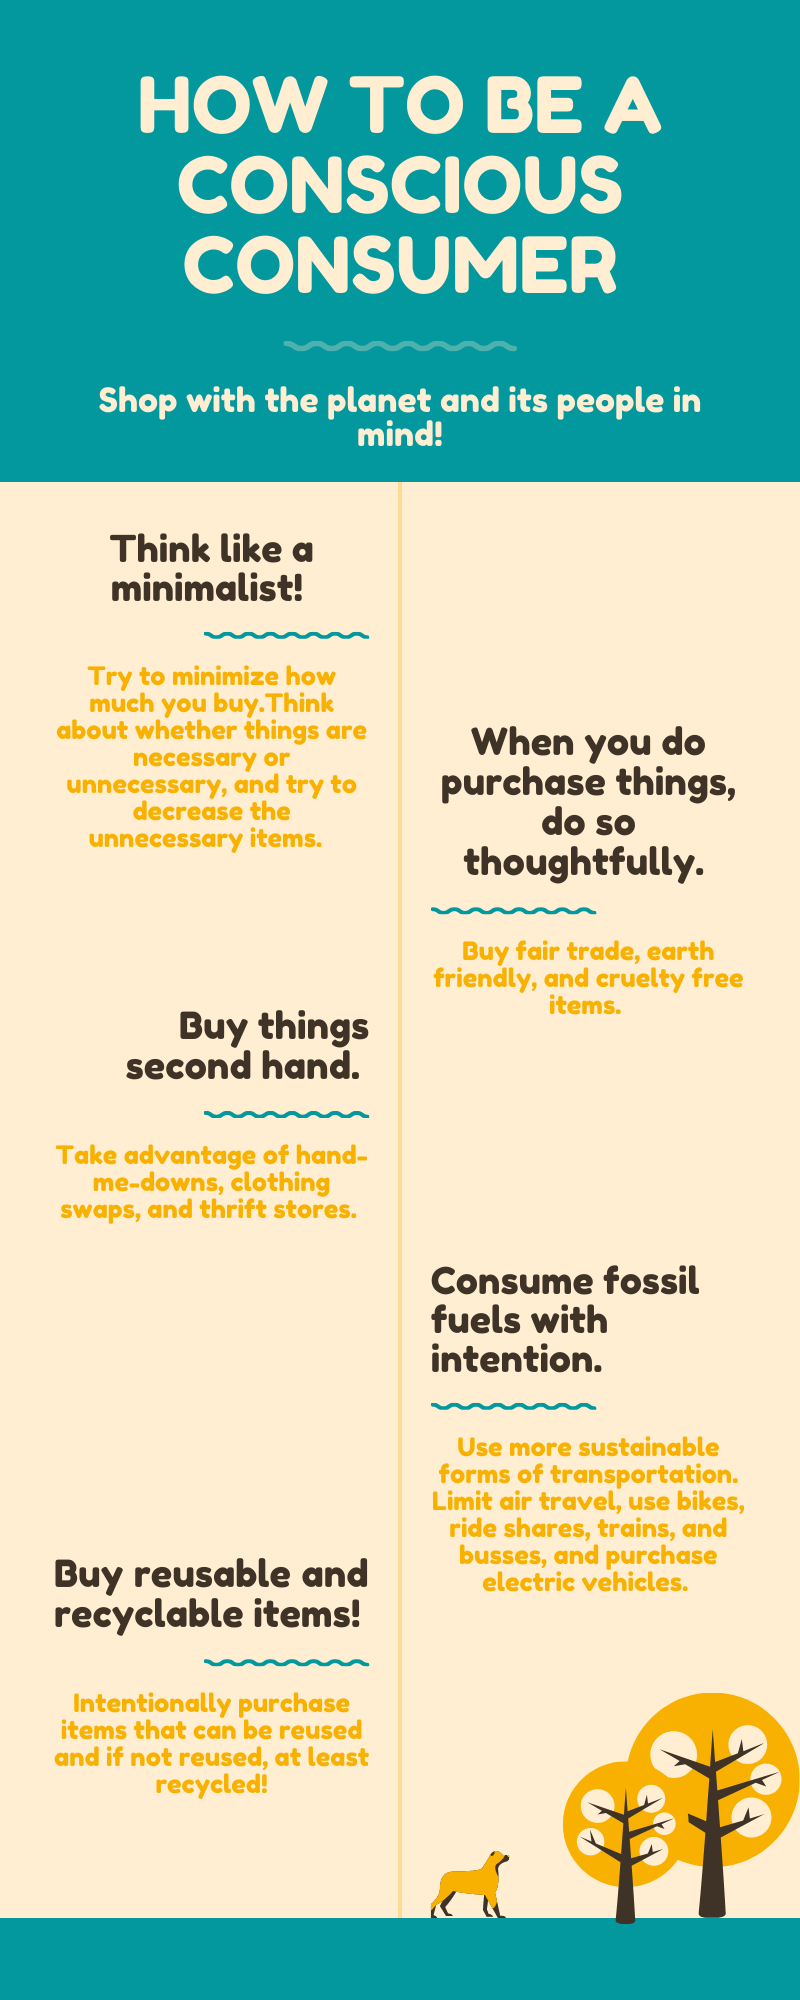 Shop with the planet and its people in mind! Think like a minimalist- try to minimize how much yuo buy. Think about whether things are necessary or unessary, and try to decrease the uneccesary. When you do purchase things, do so thoughtfullly. Buy fair trade, earth friendly, and cruelty free items. Buy things second hand. Take advantage of hand-me-downs, clothing swaps, and thrift stores. Consume fossil fuels with intention. Use more sustainable forms of transportation. Limit air travel, use bikes, ride shares, trains, and busses, and purchase electric vehicles. Buy reusable and recyclable items! Intentionally purchase items that can be reused and if not reused at least recycled!